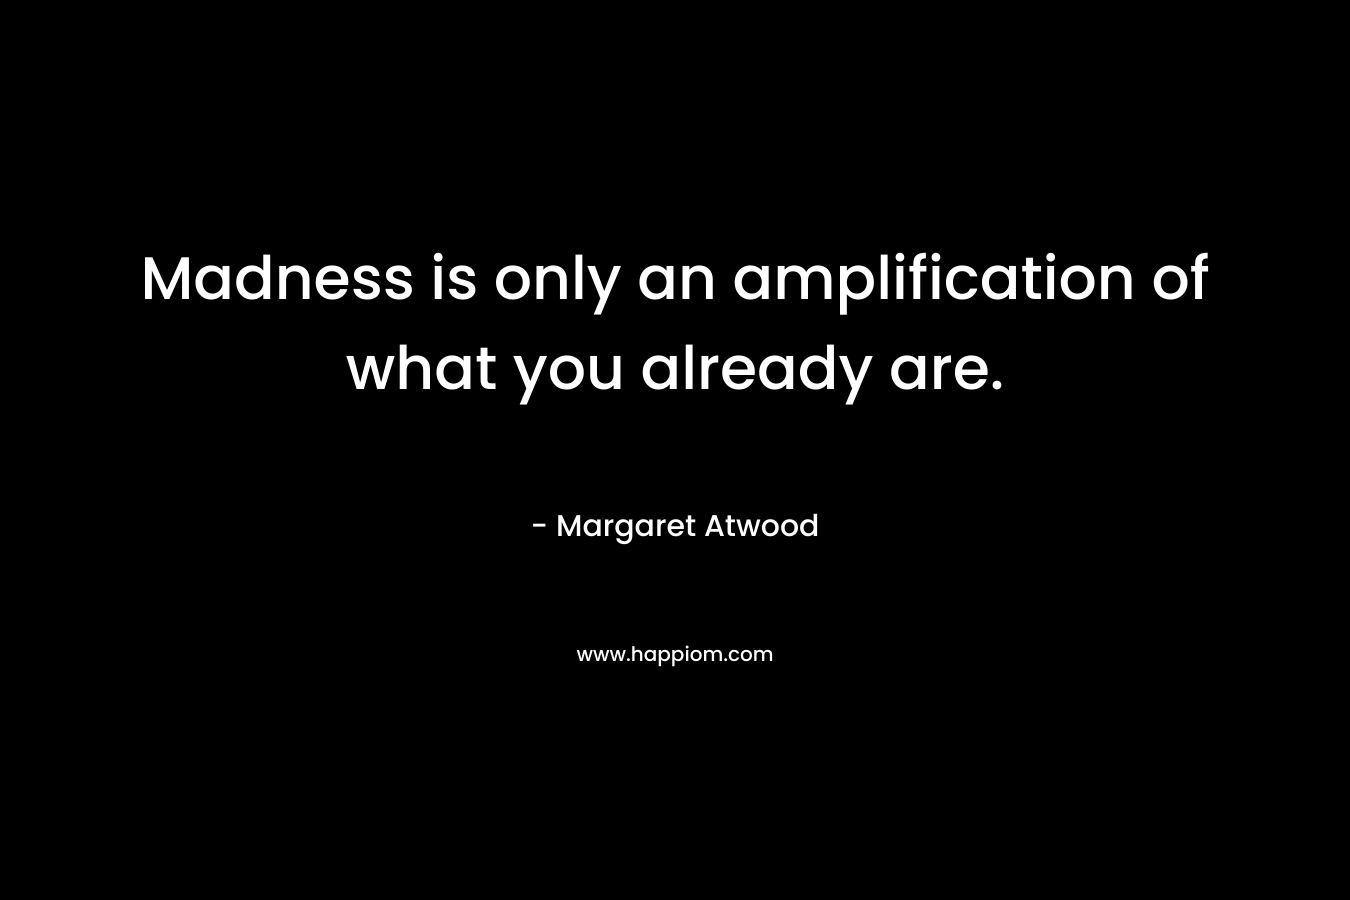 Madness is only an amplification of what you already are.